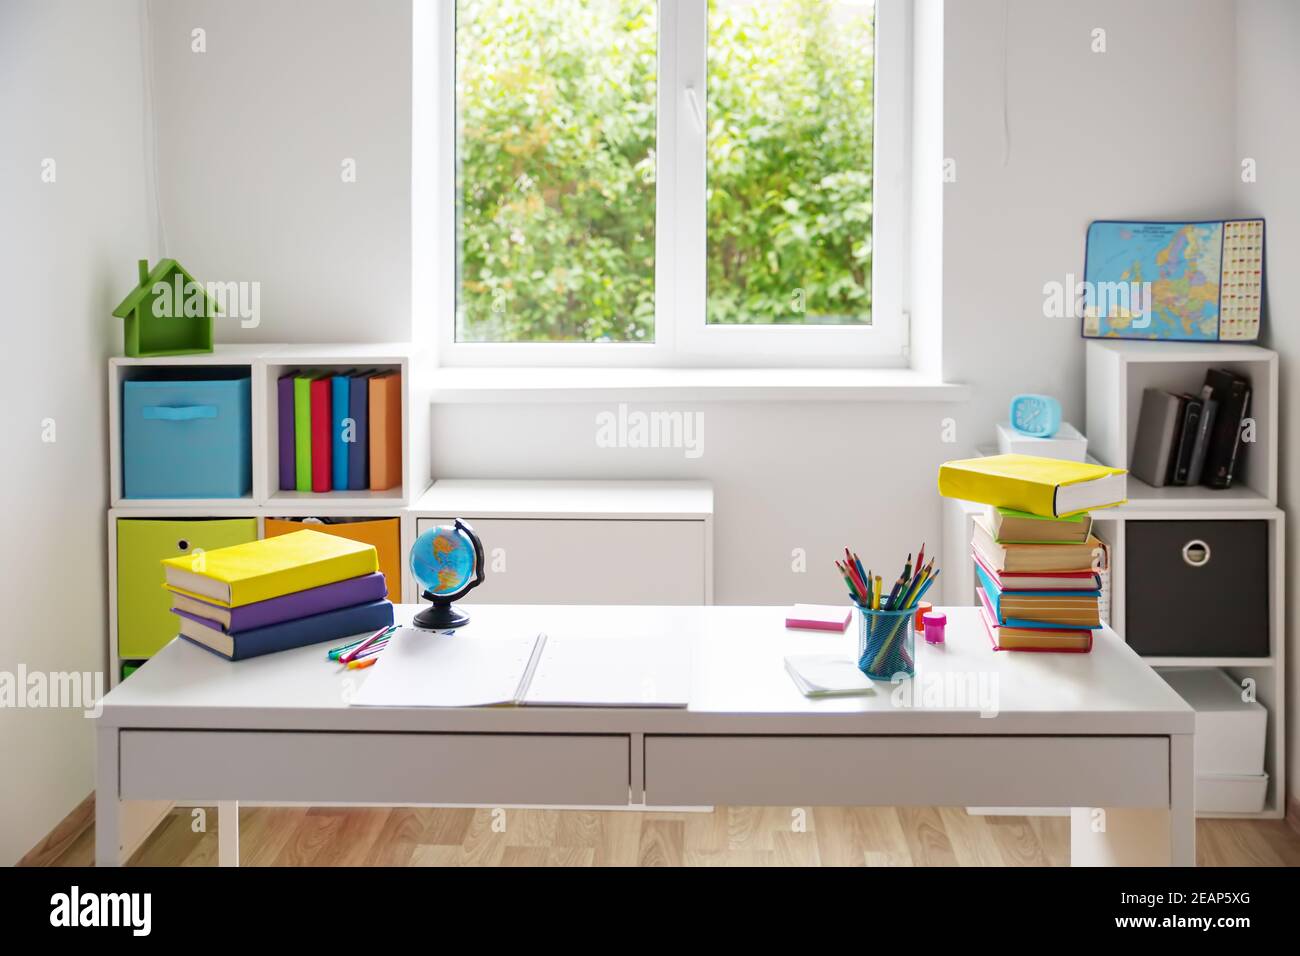 Colourful children rooom with white walls and furniture Stock Photo